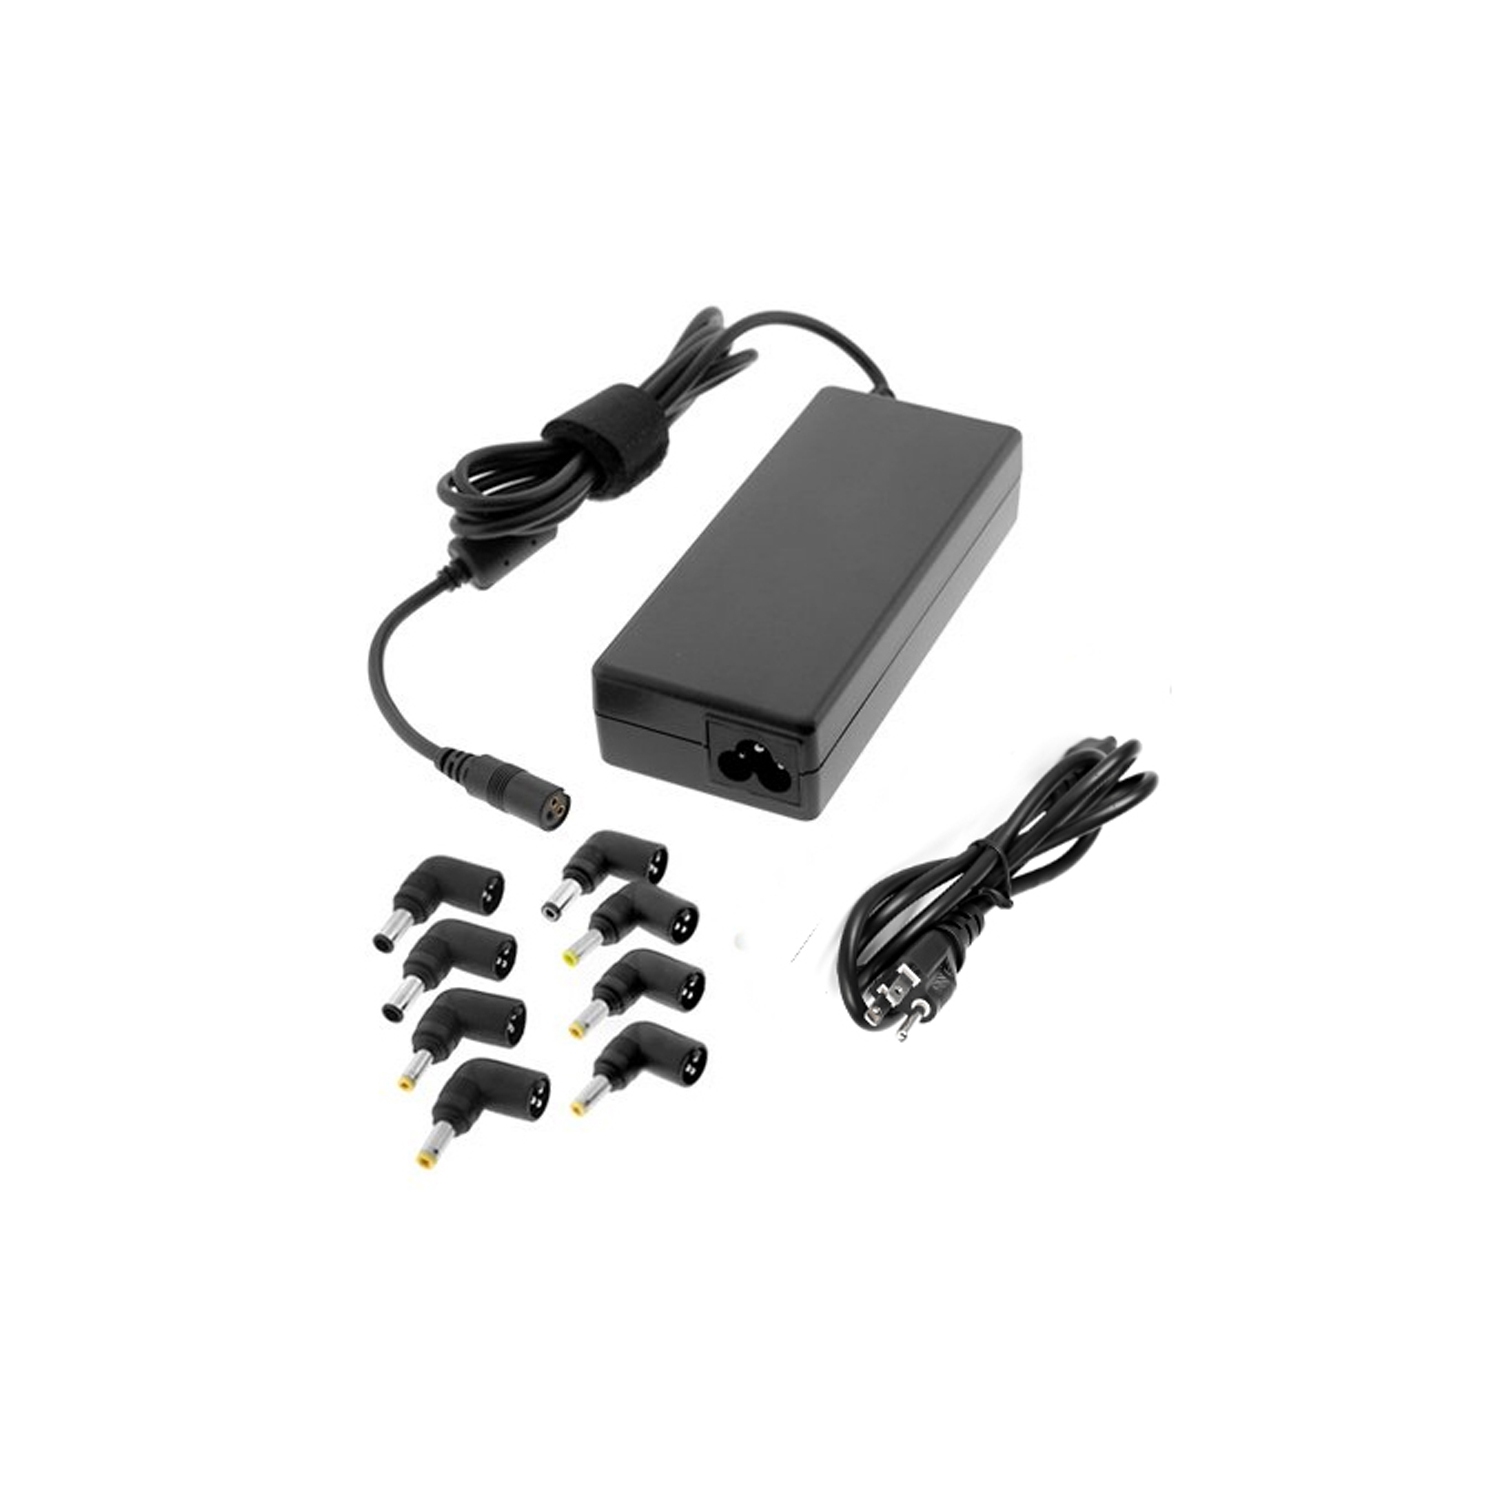 Superb Choice® 90W Universal AC Adapter Power Charger for Laptop Notebook Power Supply Adapter